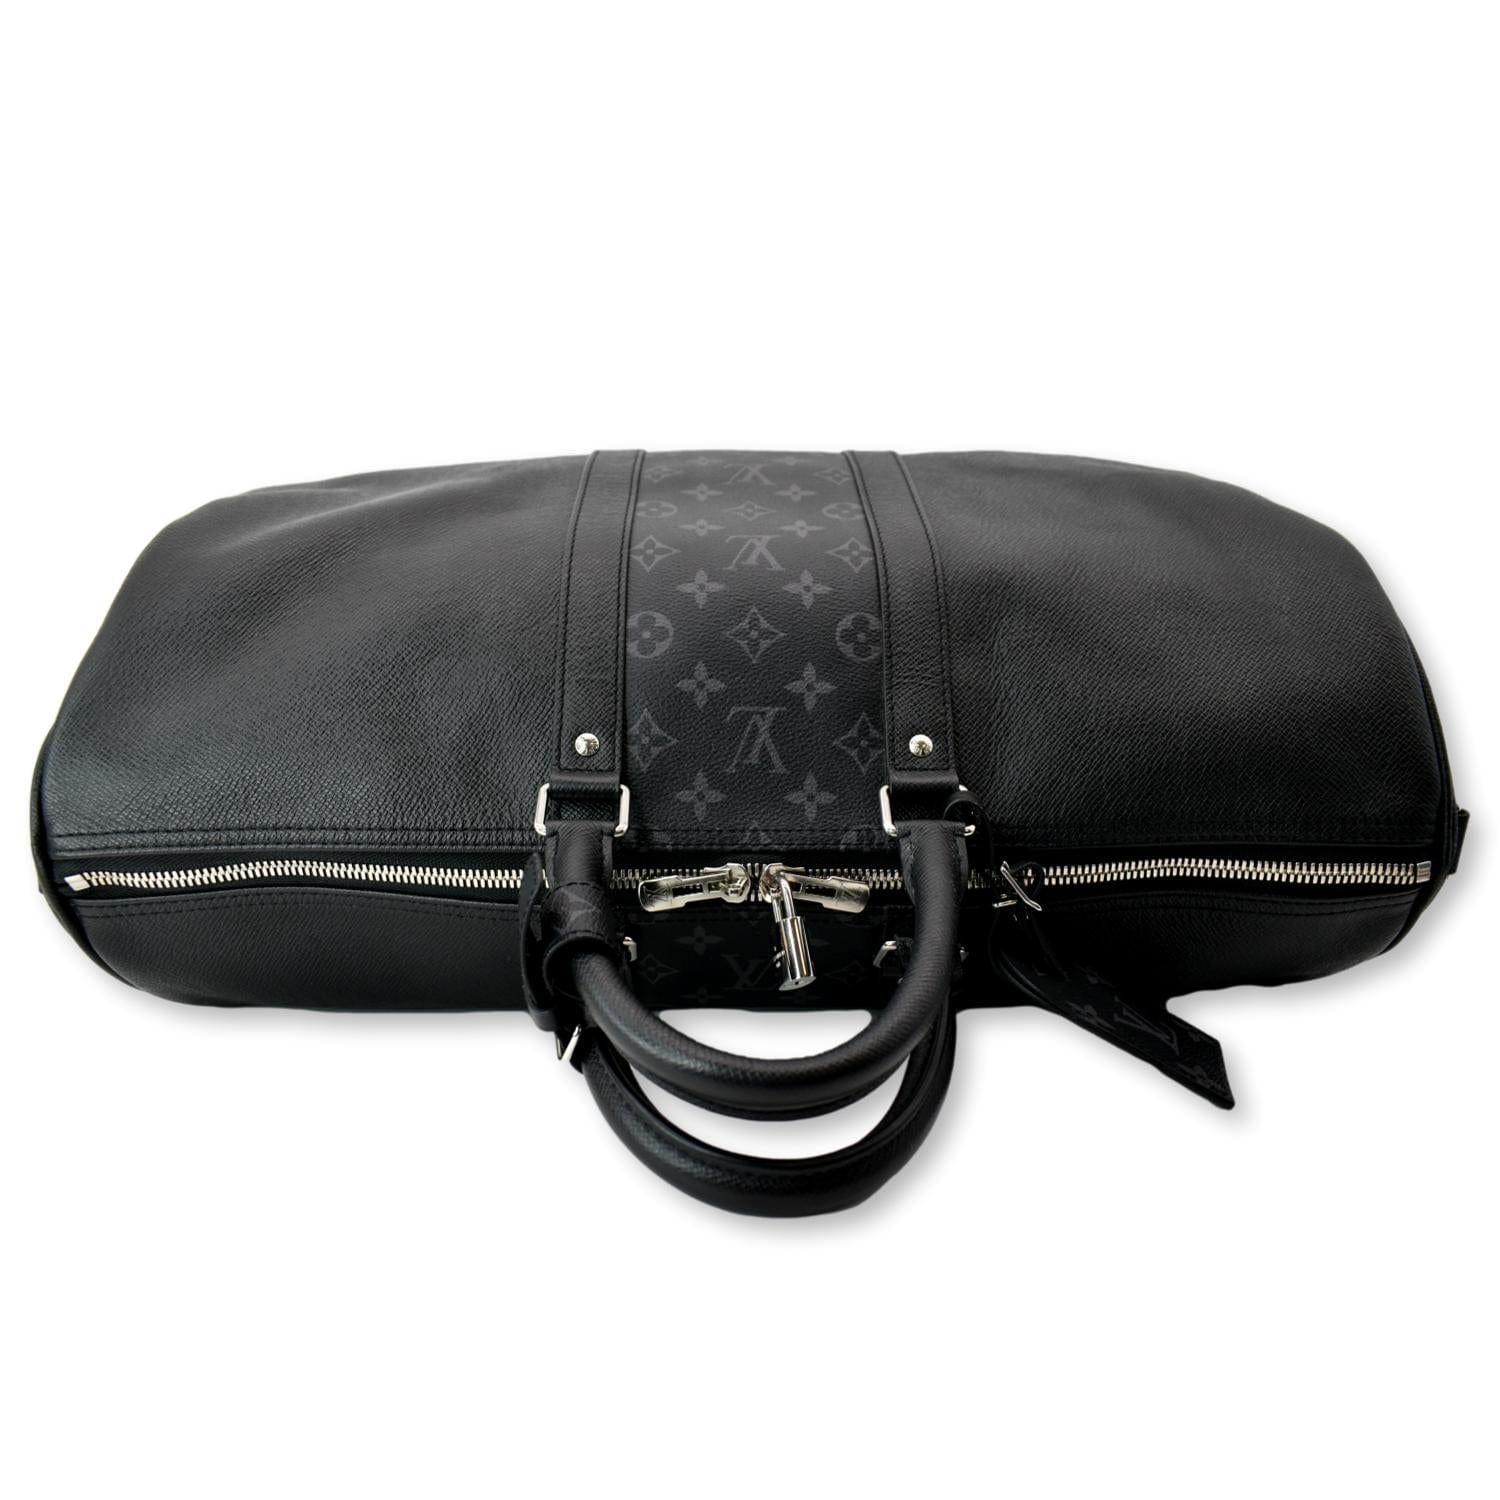 Louis Vuitton Keepall 50 Travel bag in black épi leather at